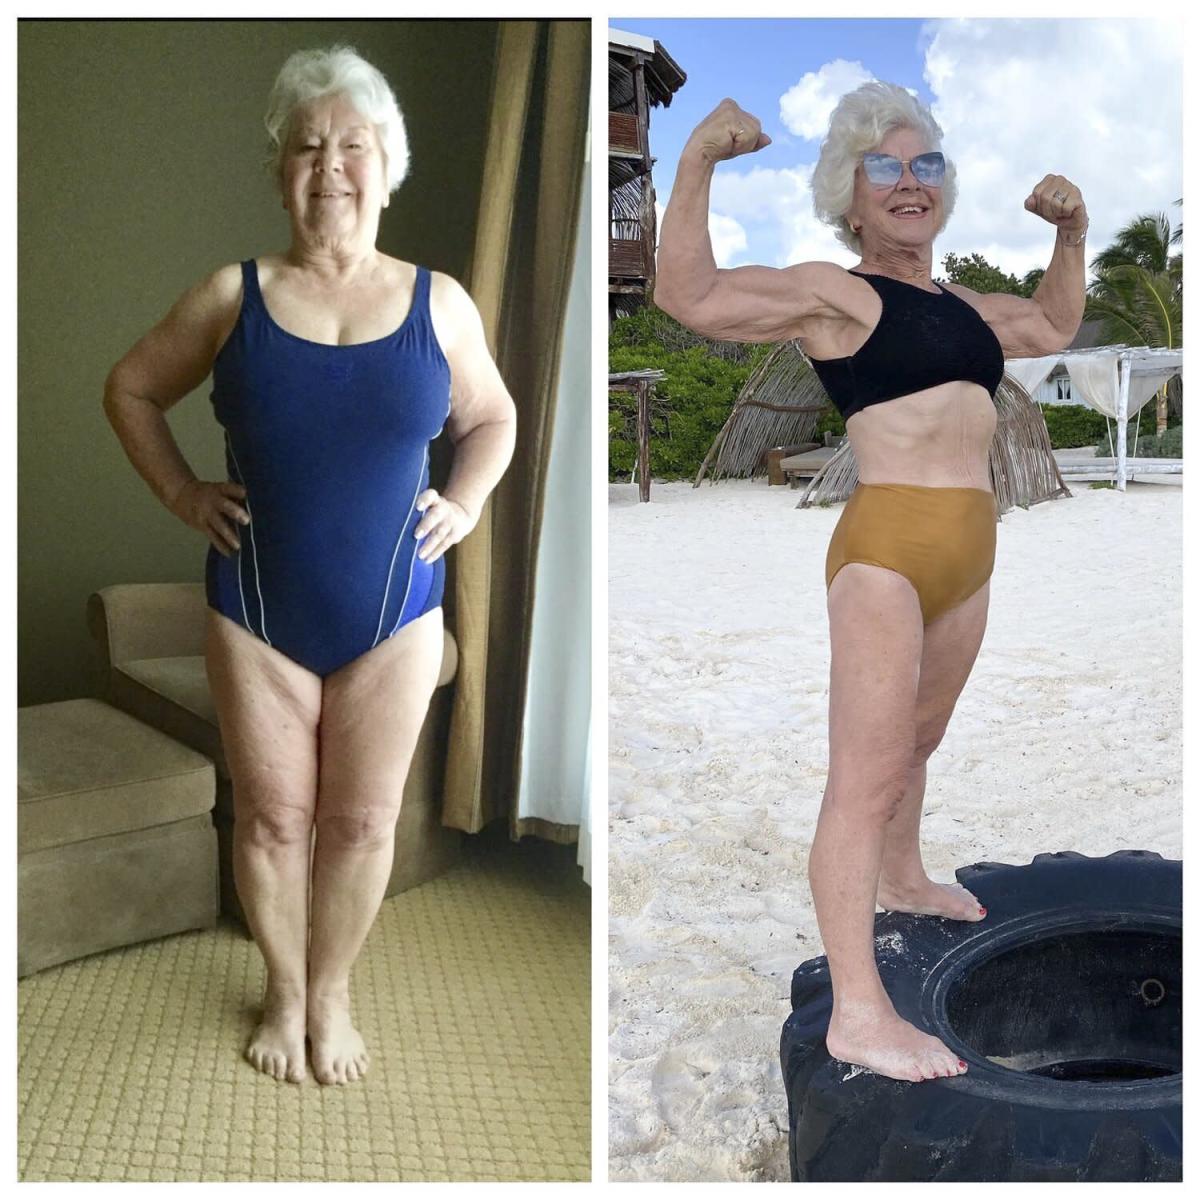 75-Year-Old Fitness Influencer After Losing 68 Lbs. and Taking Up Weightlifting: ‘Now I’m Living’